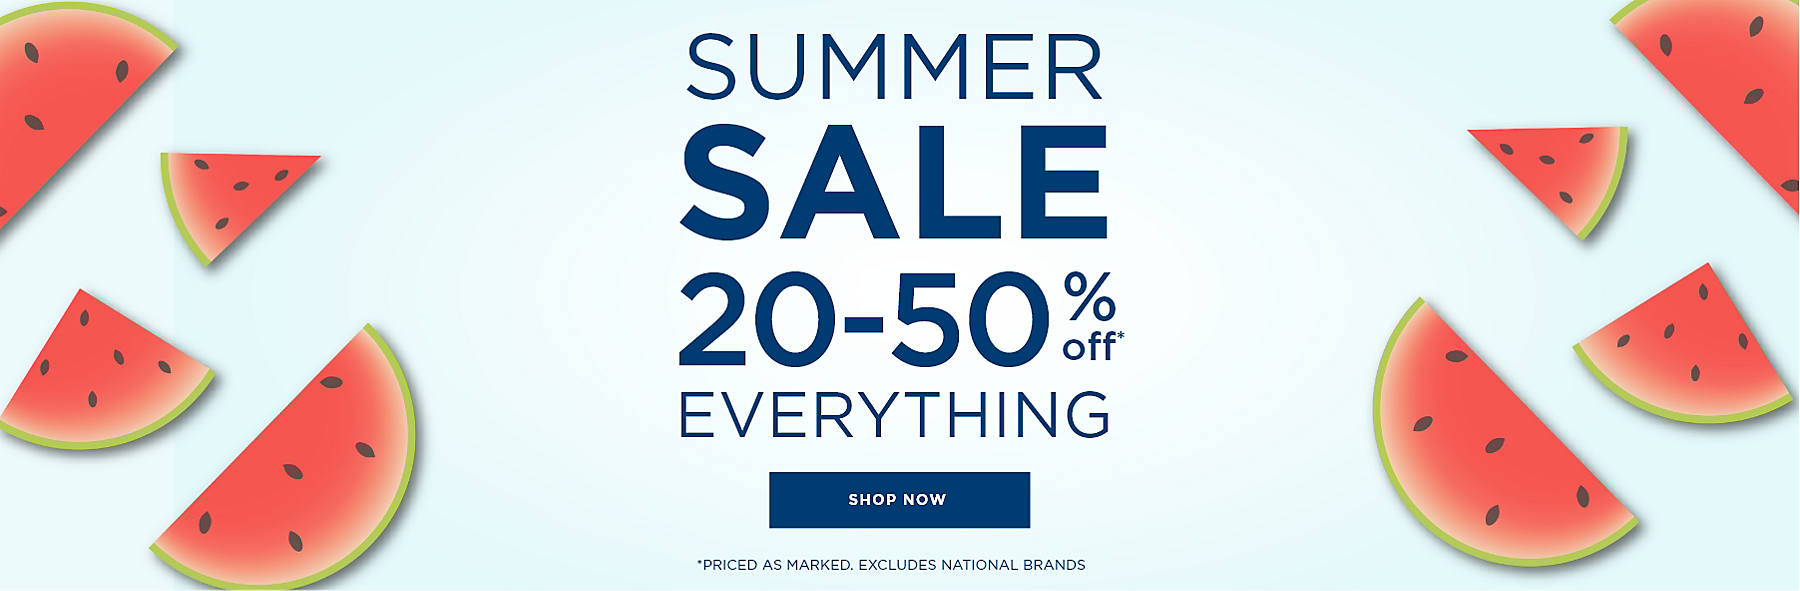 Summer Sale 20-50% Off* Everything *Priced as marked. Excludes National Brands Shop Now